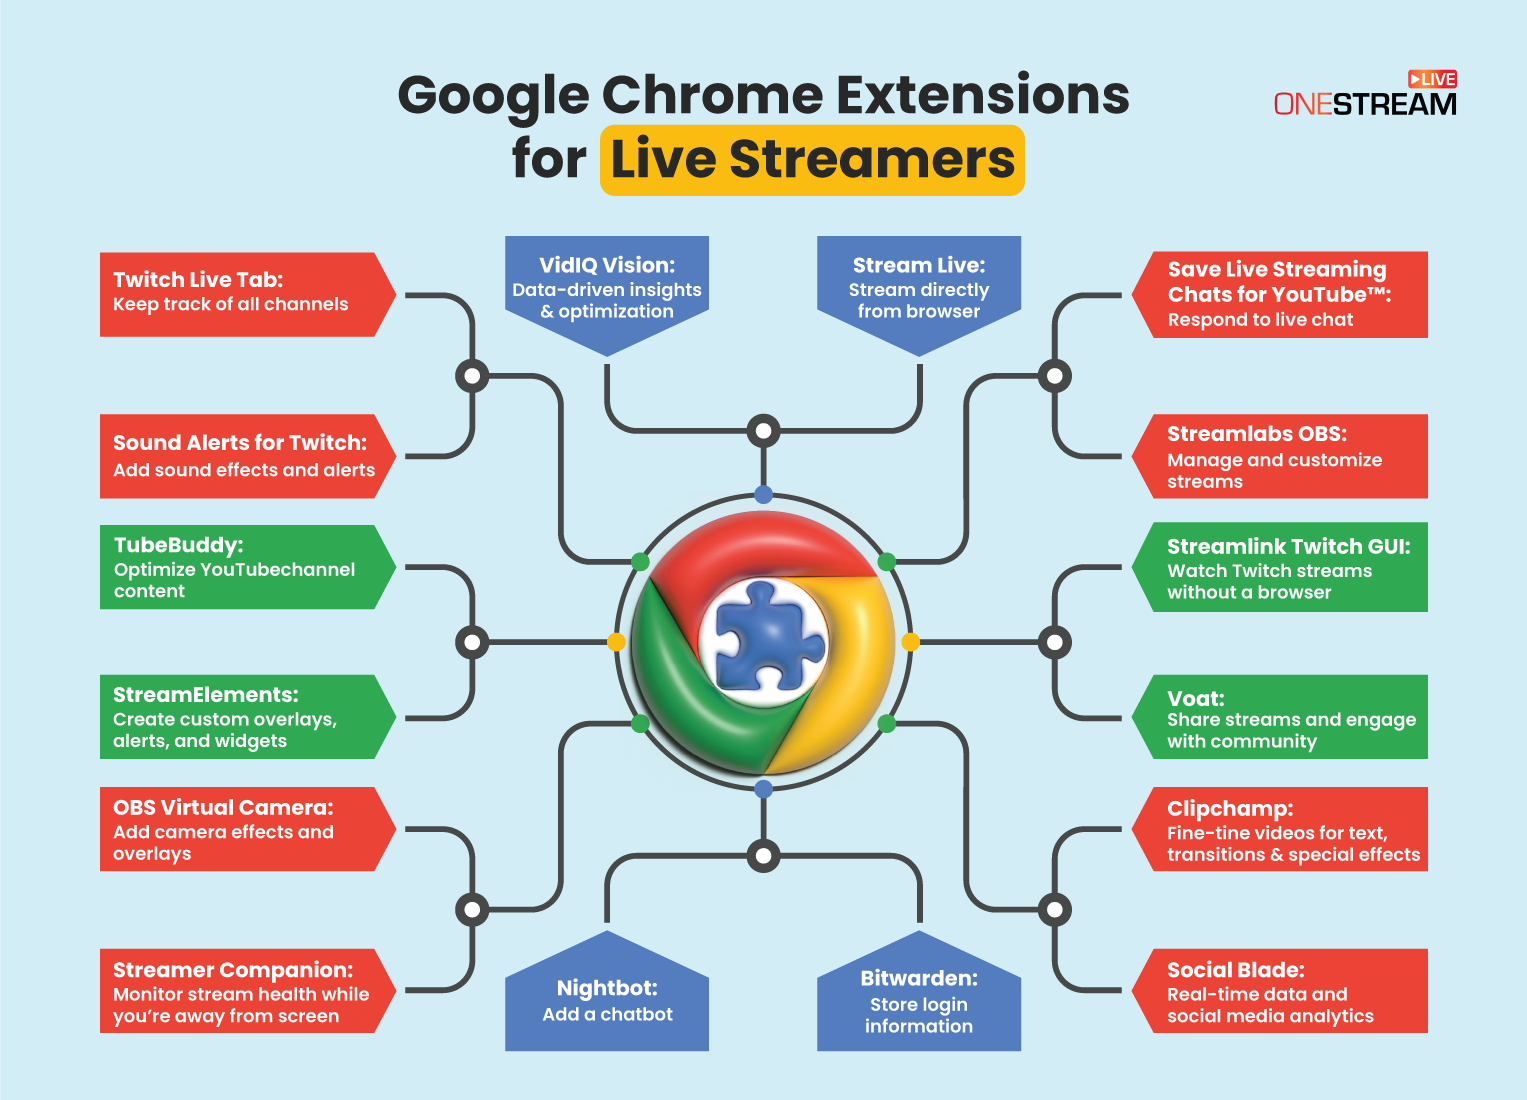 Google Chrome Extensions for Live Streamers